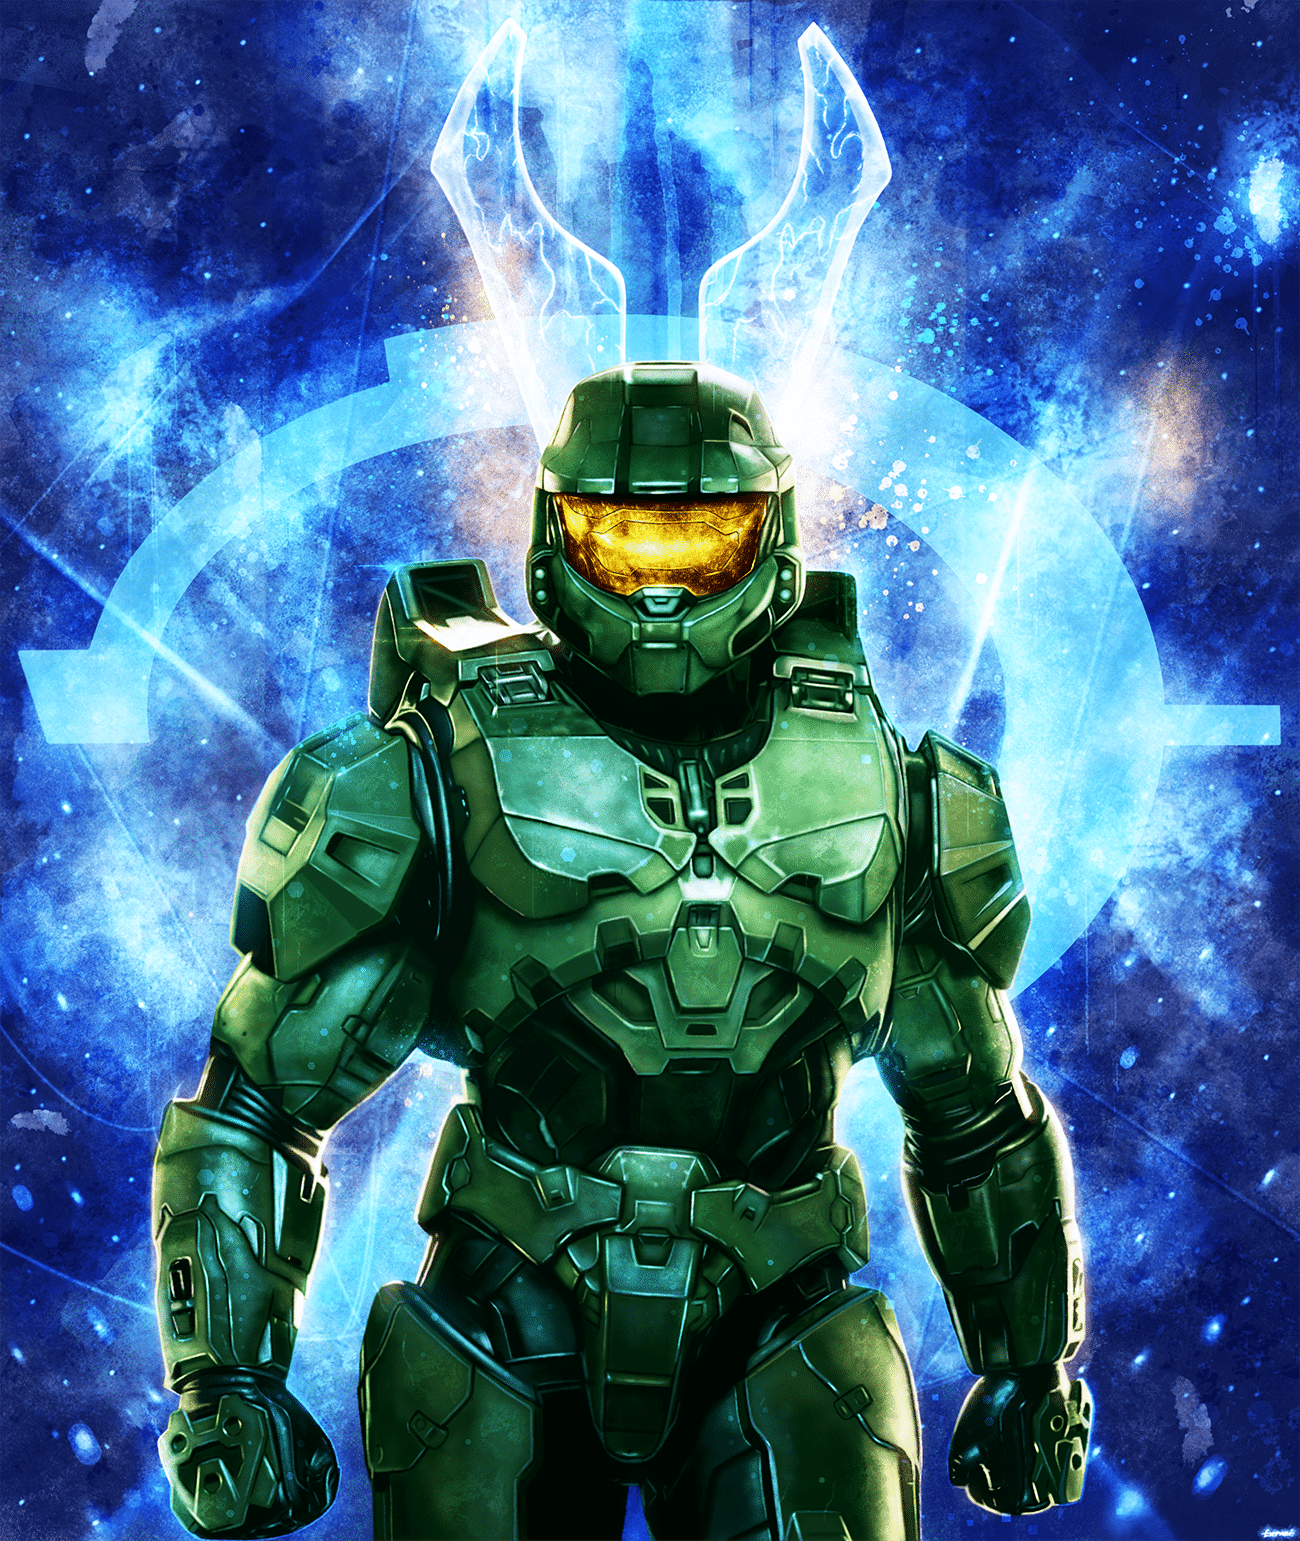 Halo - Master Chief | P1xer | PosterSpy